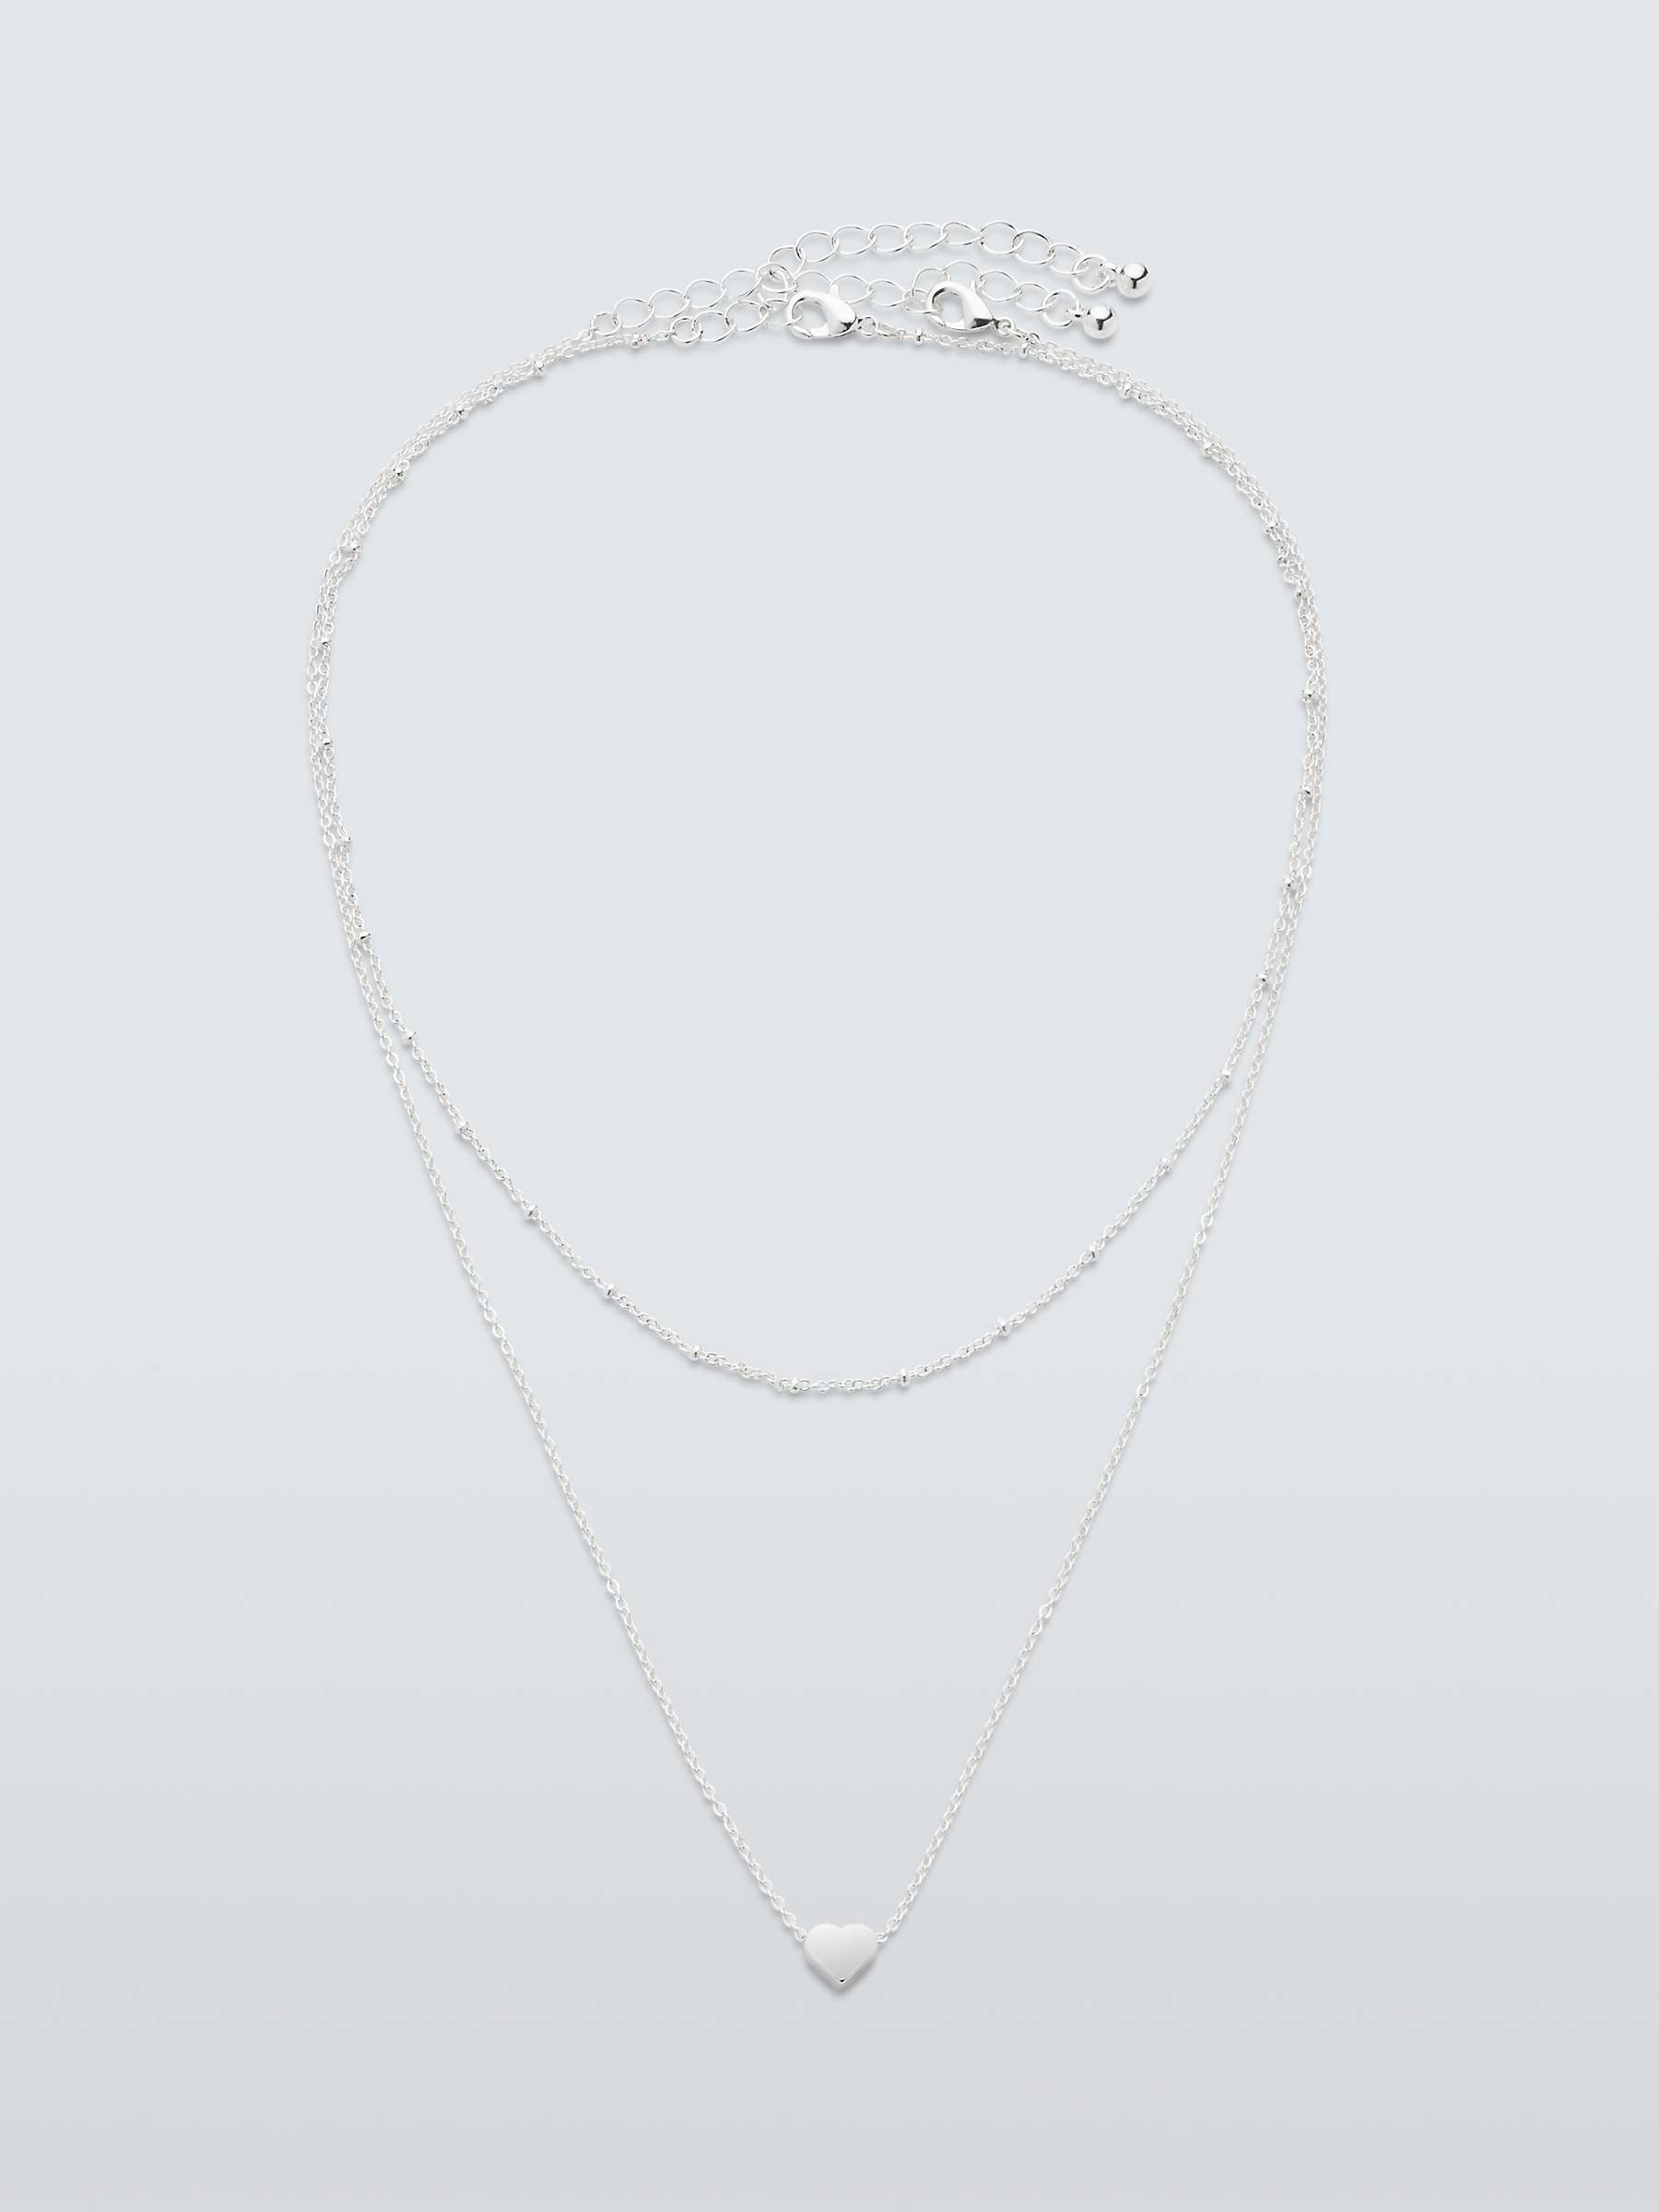 Buy John Lewis Heart Layered Chain Necklace, Pack of 2 Online at johnlewis.com